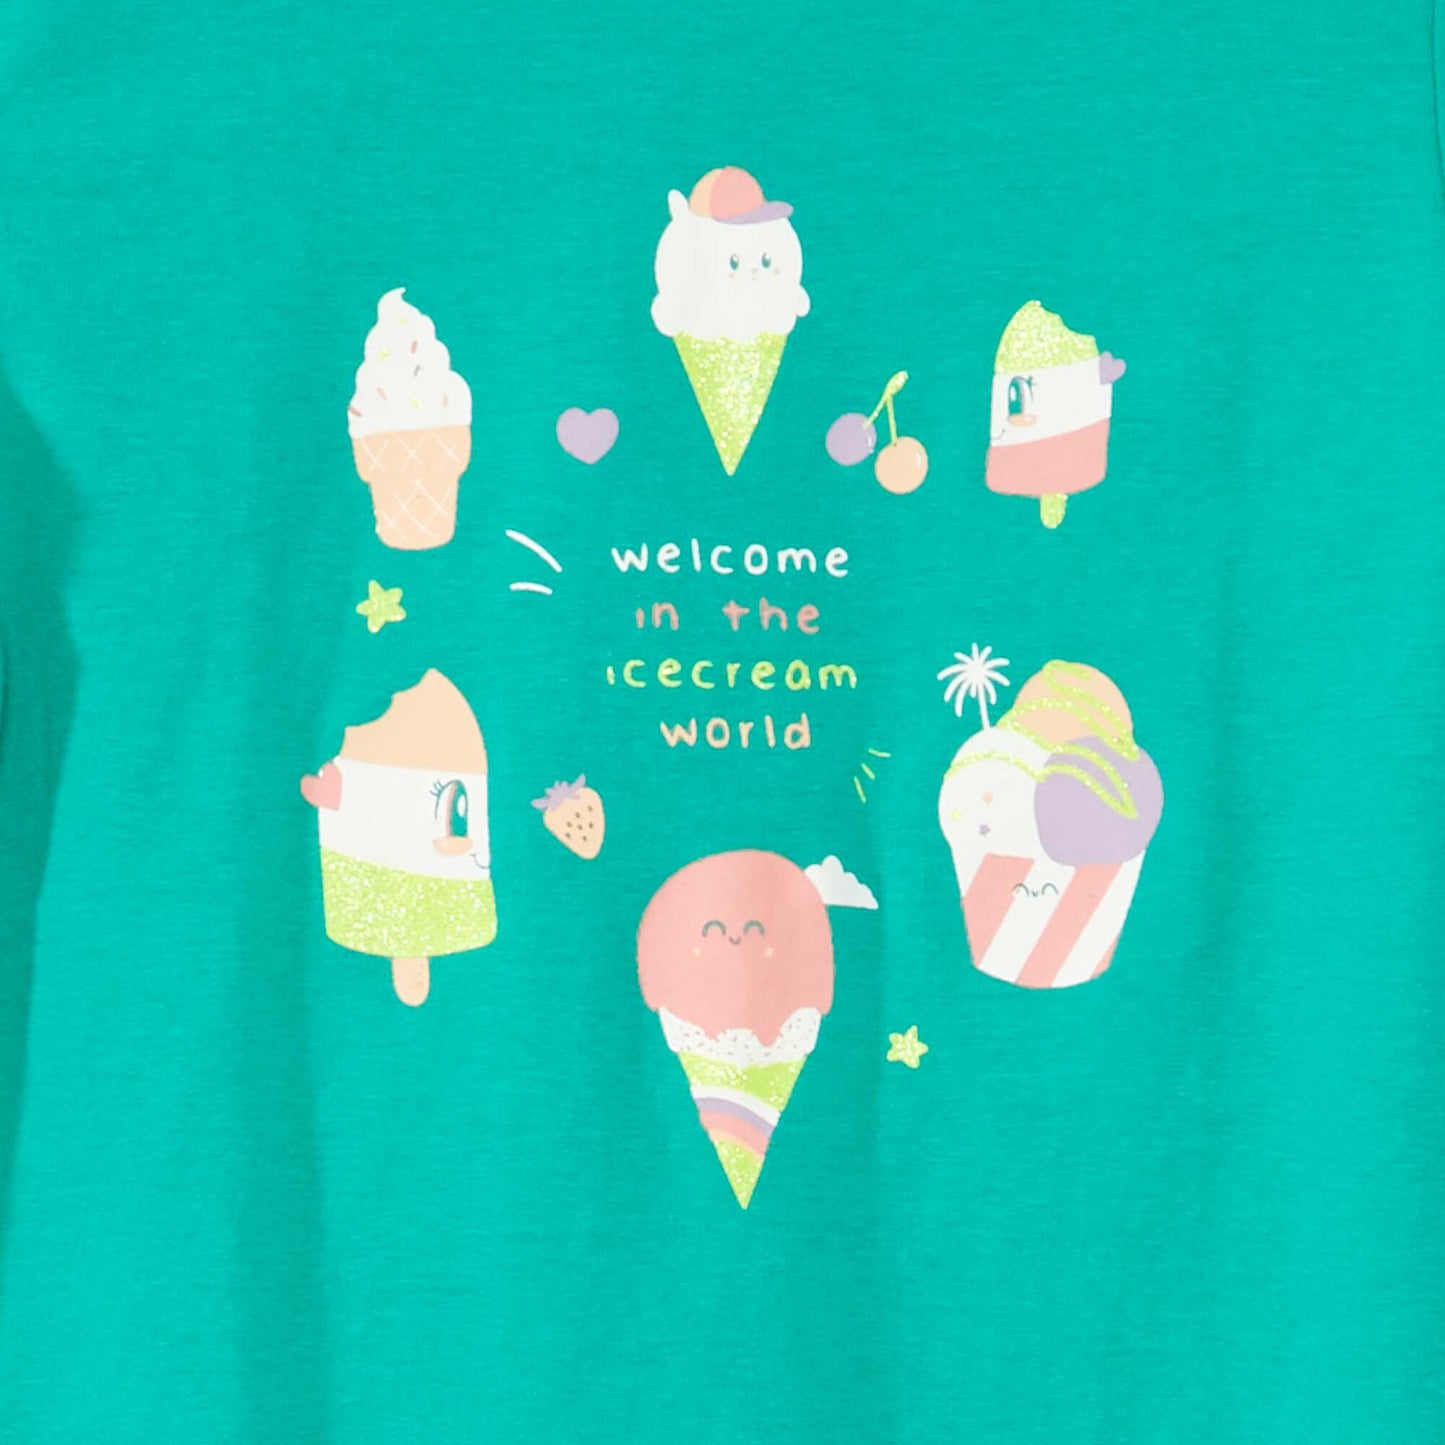 Jersey T-shirt with cute patterns GREEN